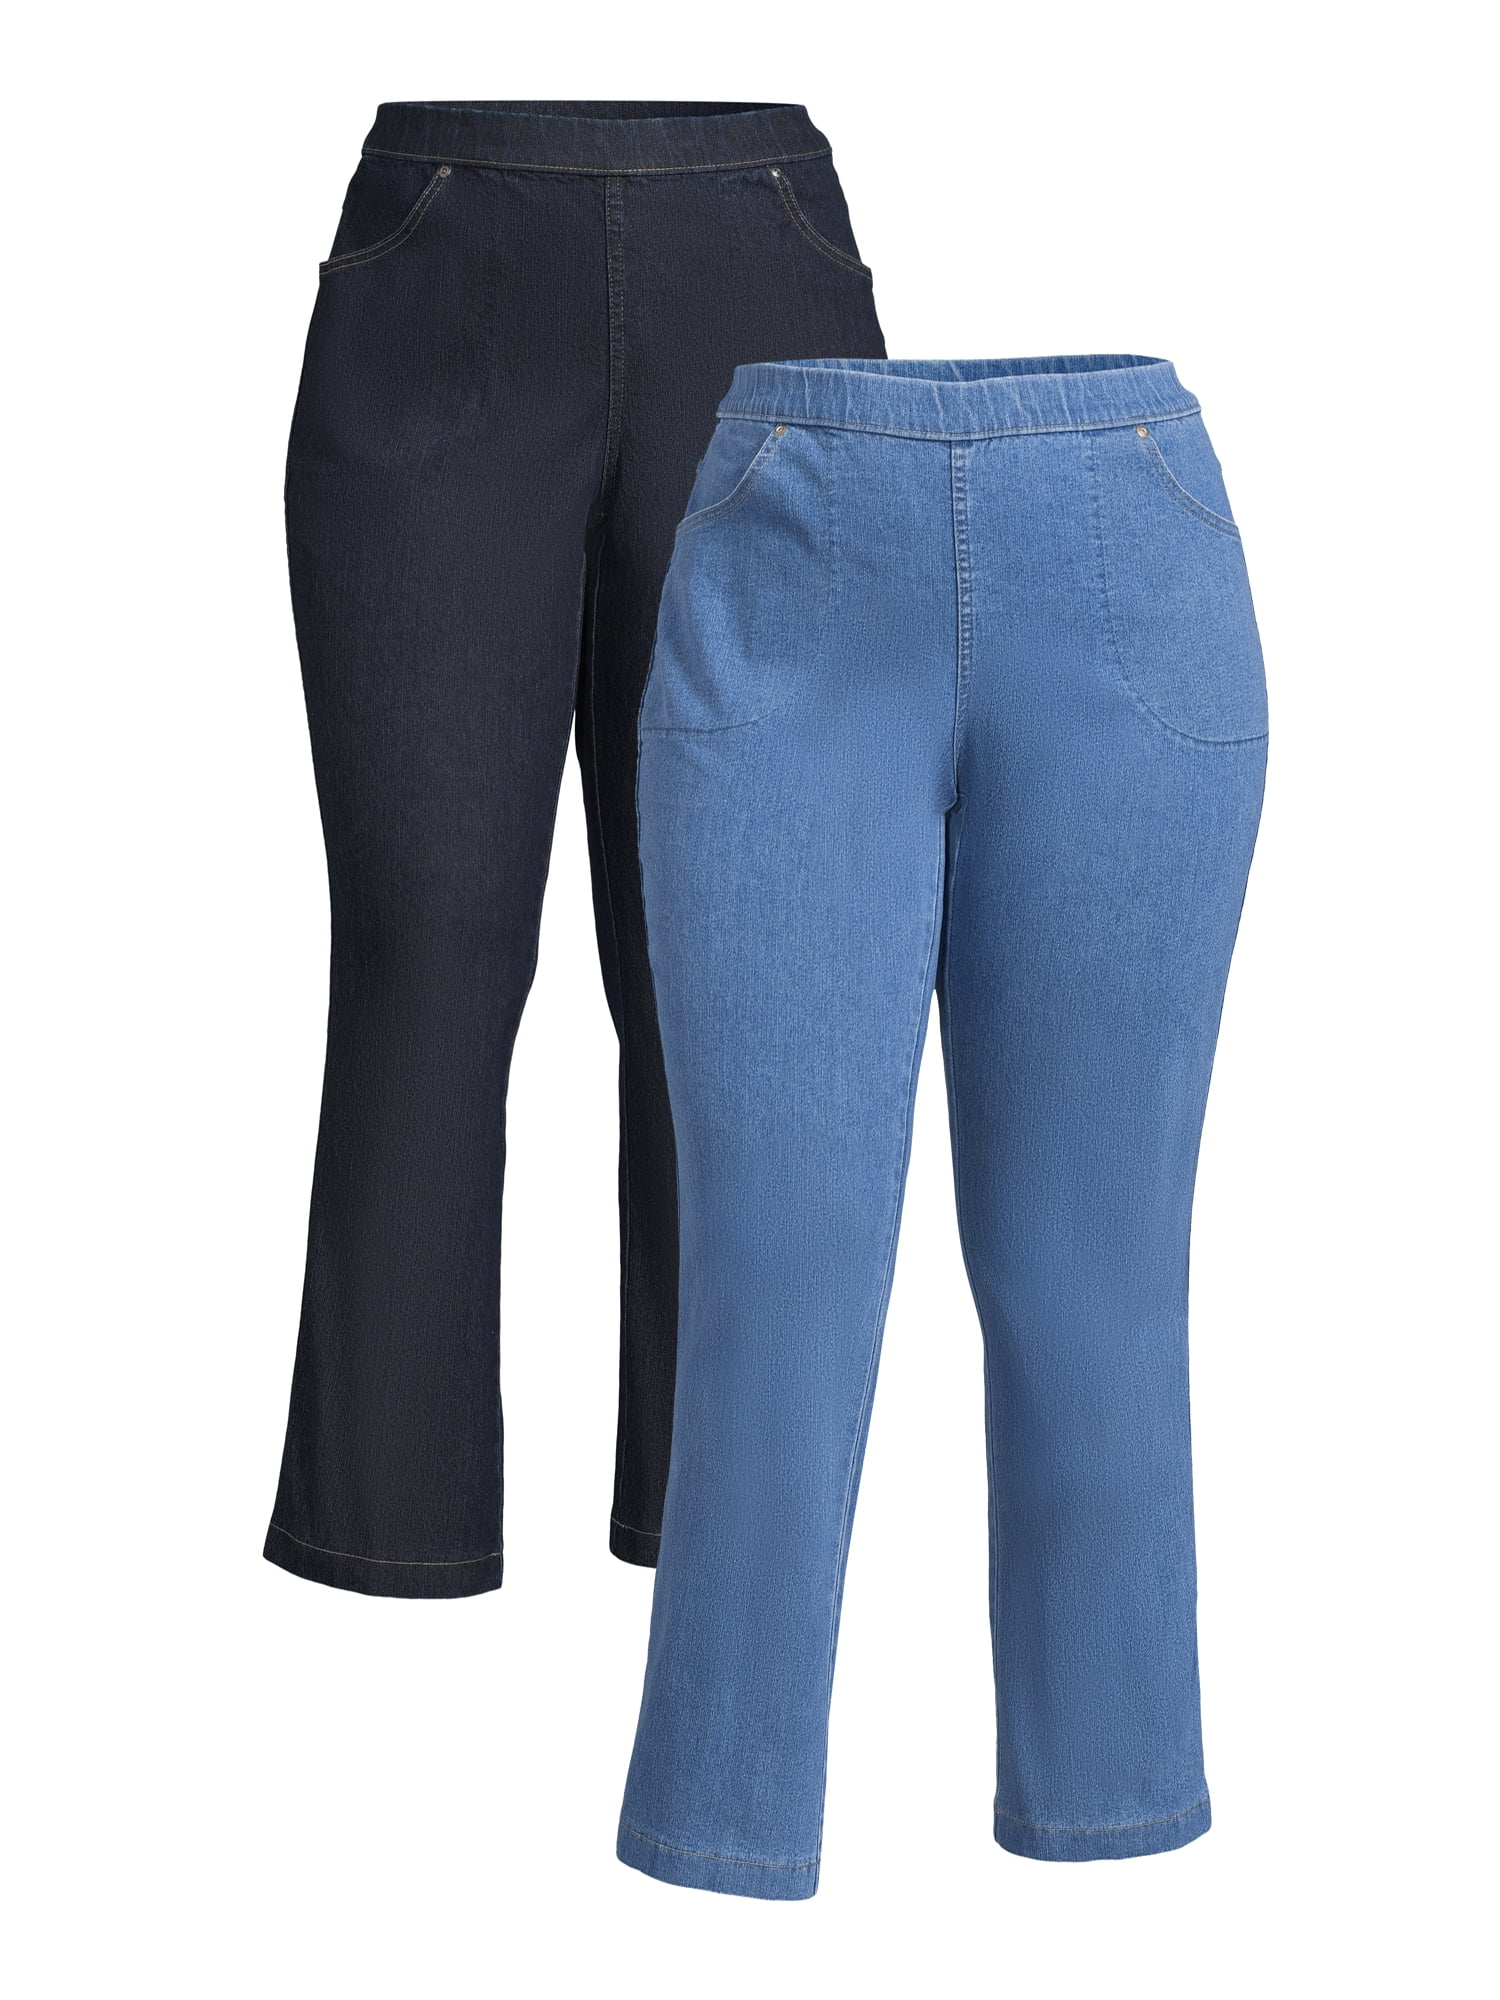 Just My Size Women's Plus Size 4-Pocket Stretch Bootcut Jeans, 2-Pack, Also  in Petite 